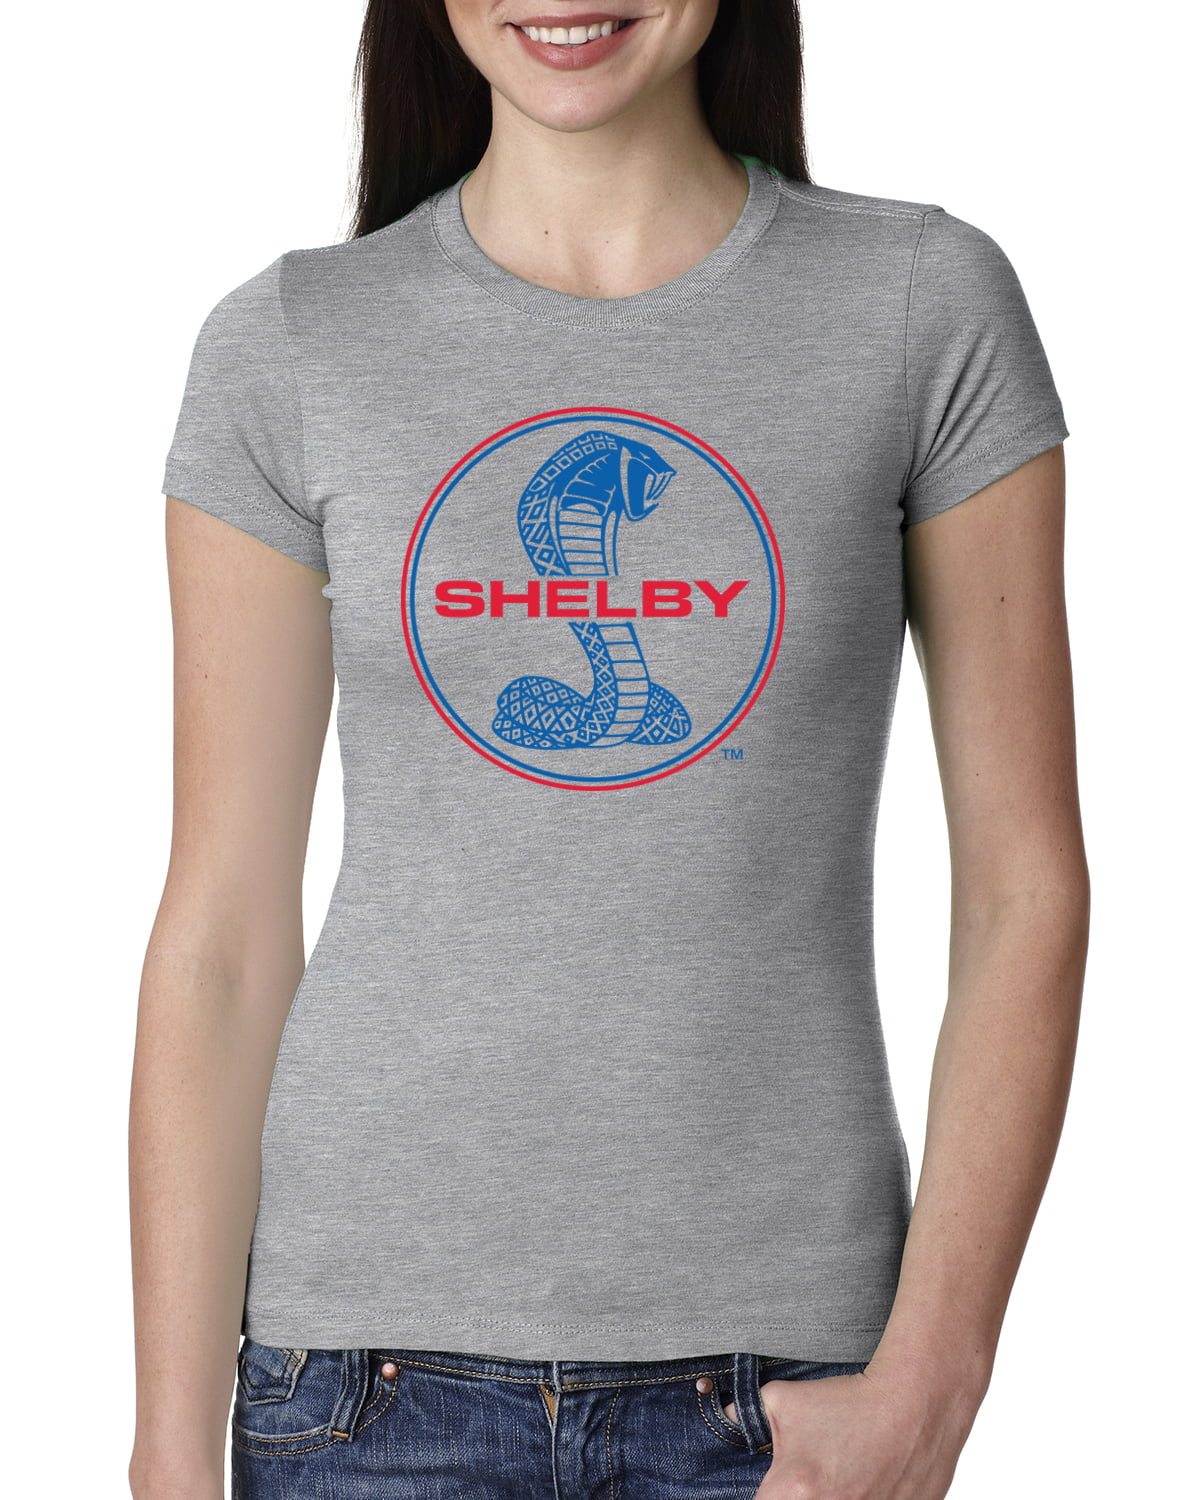 Mens Cars and Trucks Graphic T-Shirt Shelby Cobra USA Logo Emblem Powered by Ford Motors 